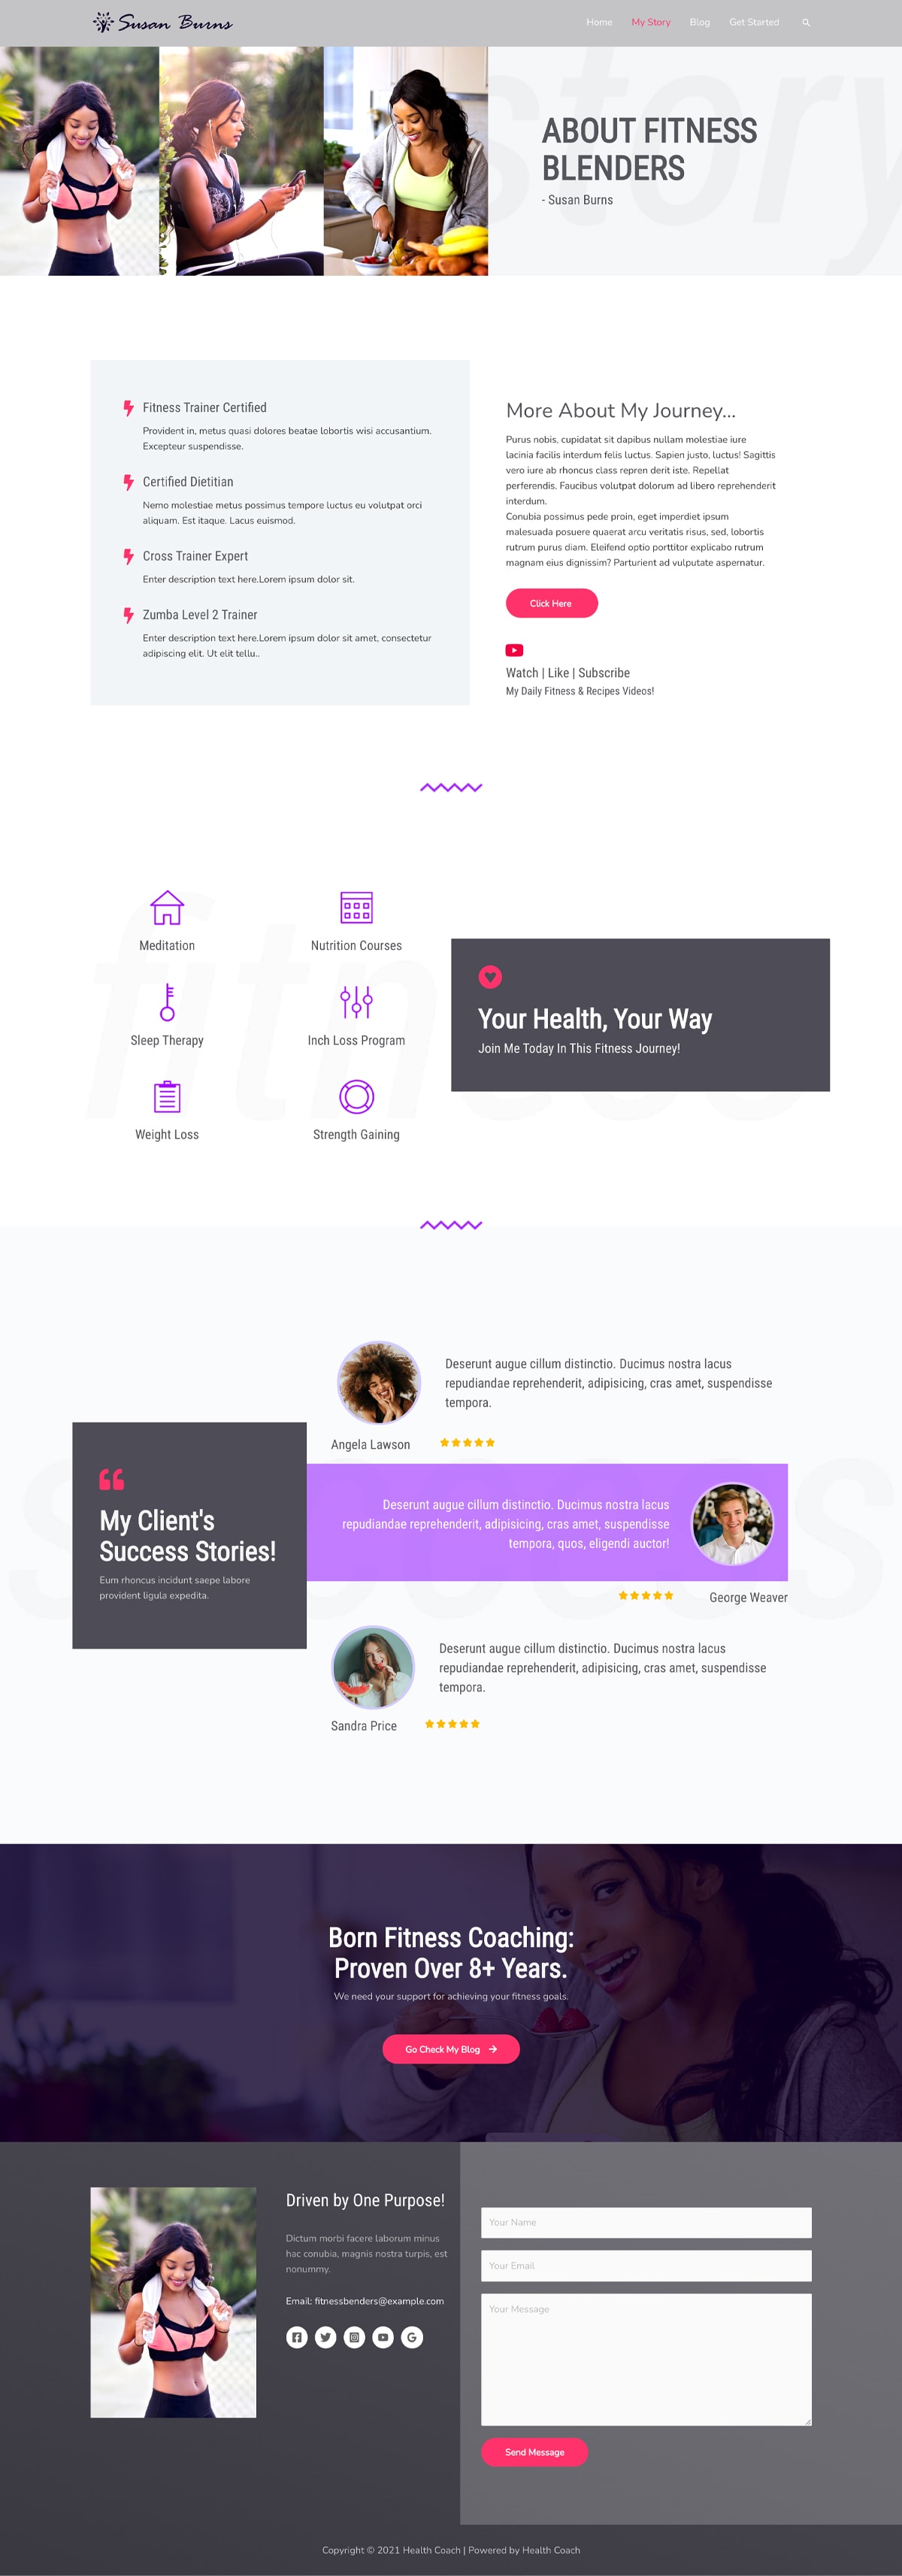 Health Coach – Engaging template for health and wellness